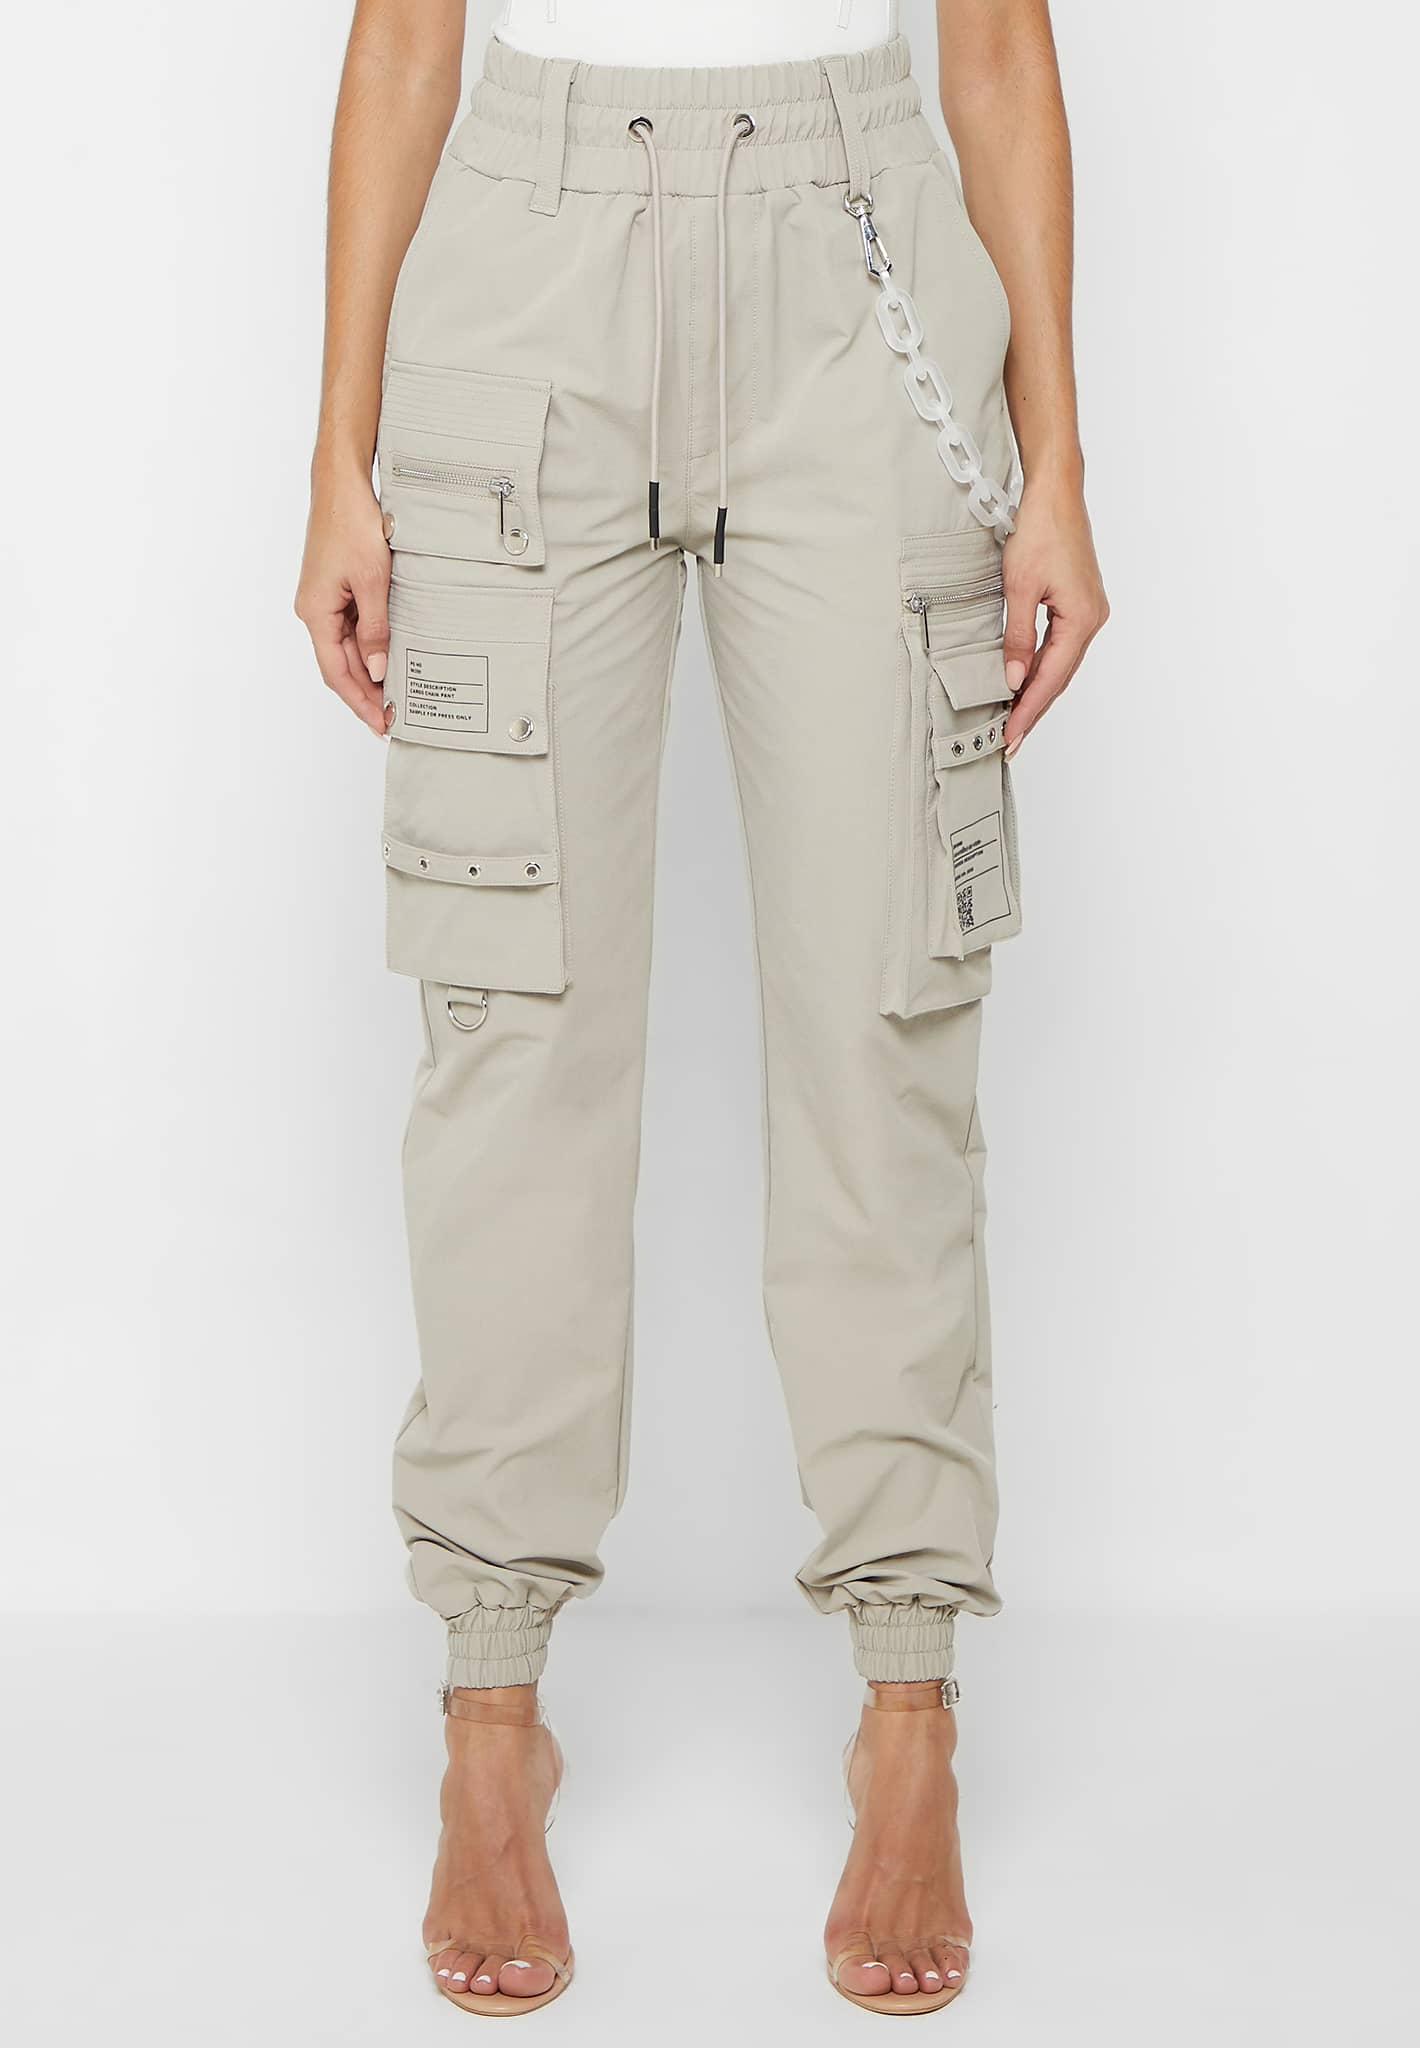 I Saw It First Womens Double Pocketed Cargo Jeans Trousers Bottoms